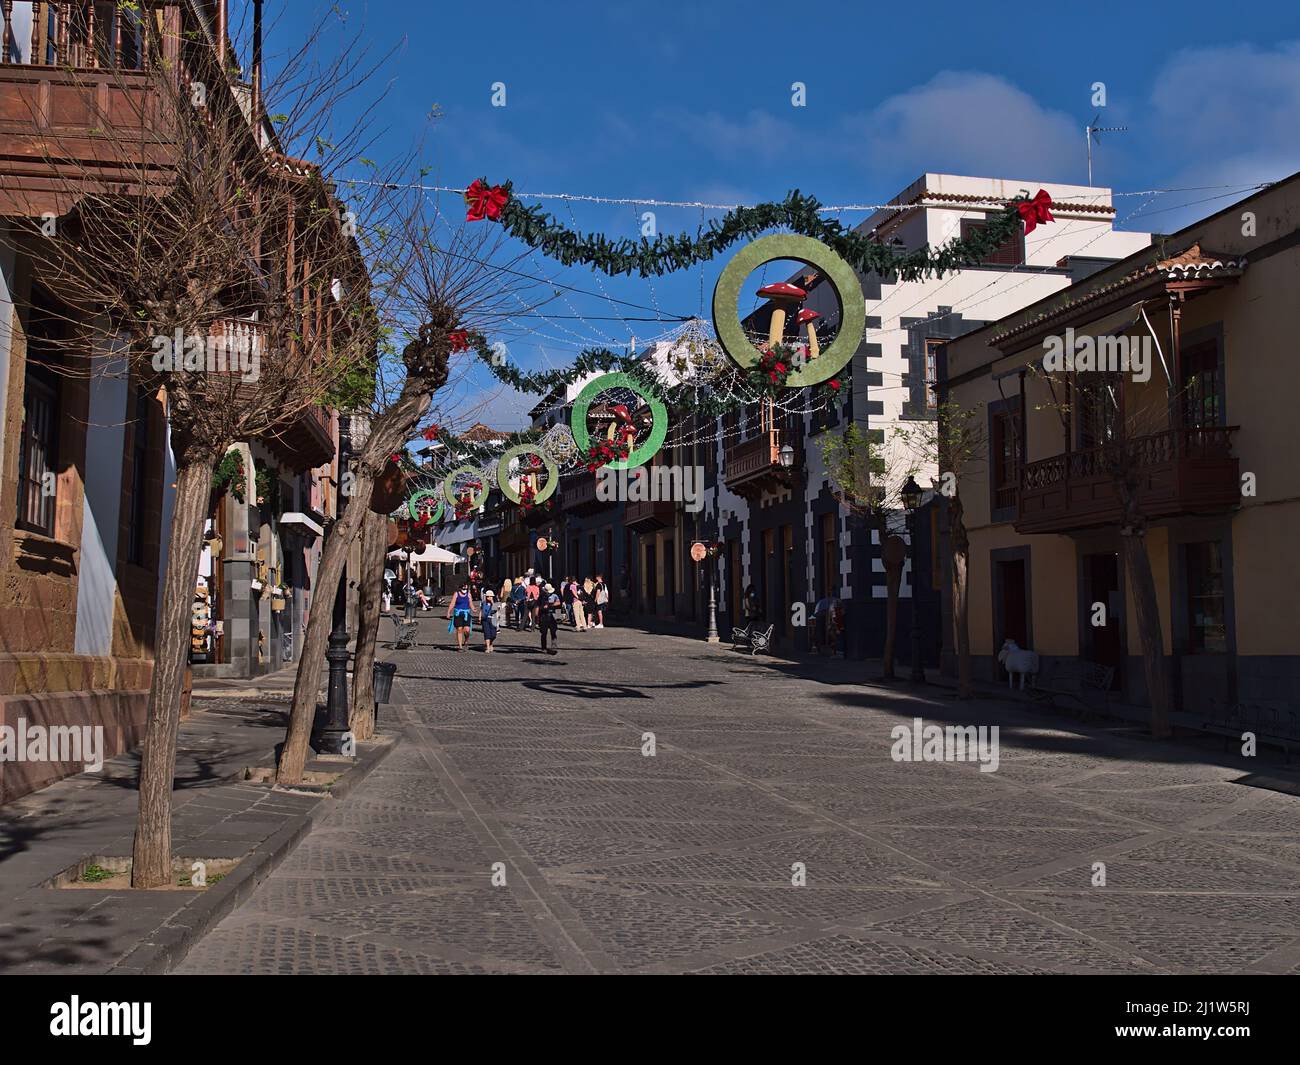 Tourists walking through pedestrianz zone in the historic center of old town Teror in Gran Canaria, Canary Islands, Spain in winter season with shops. Stock Photo